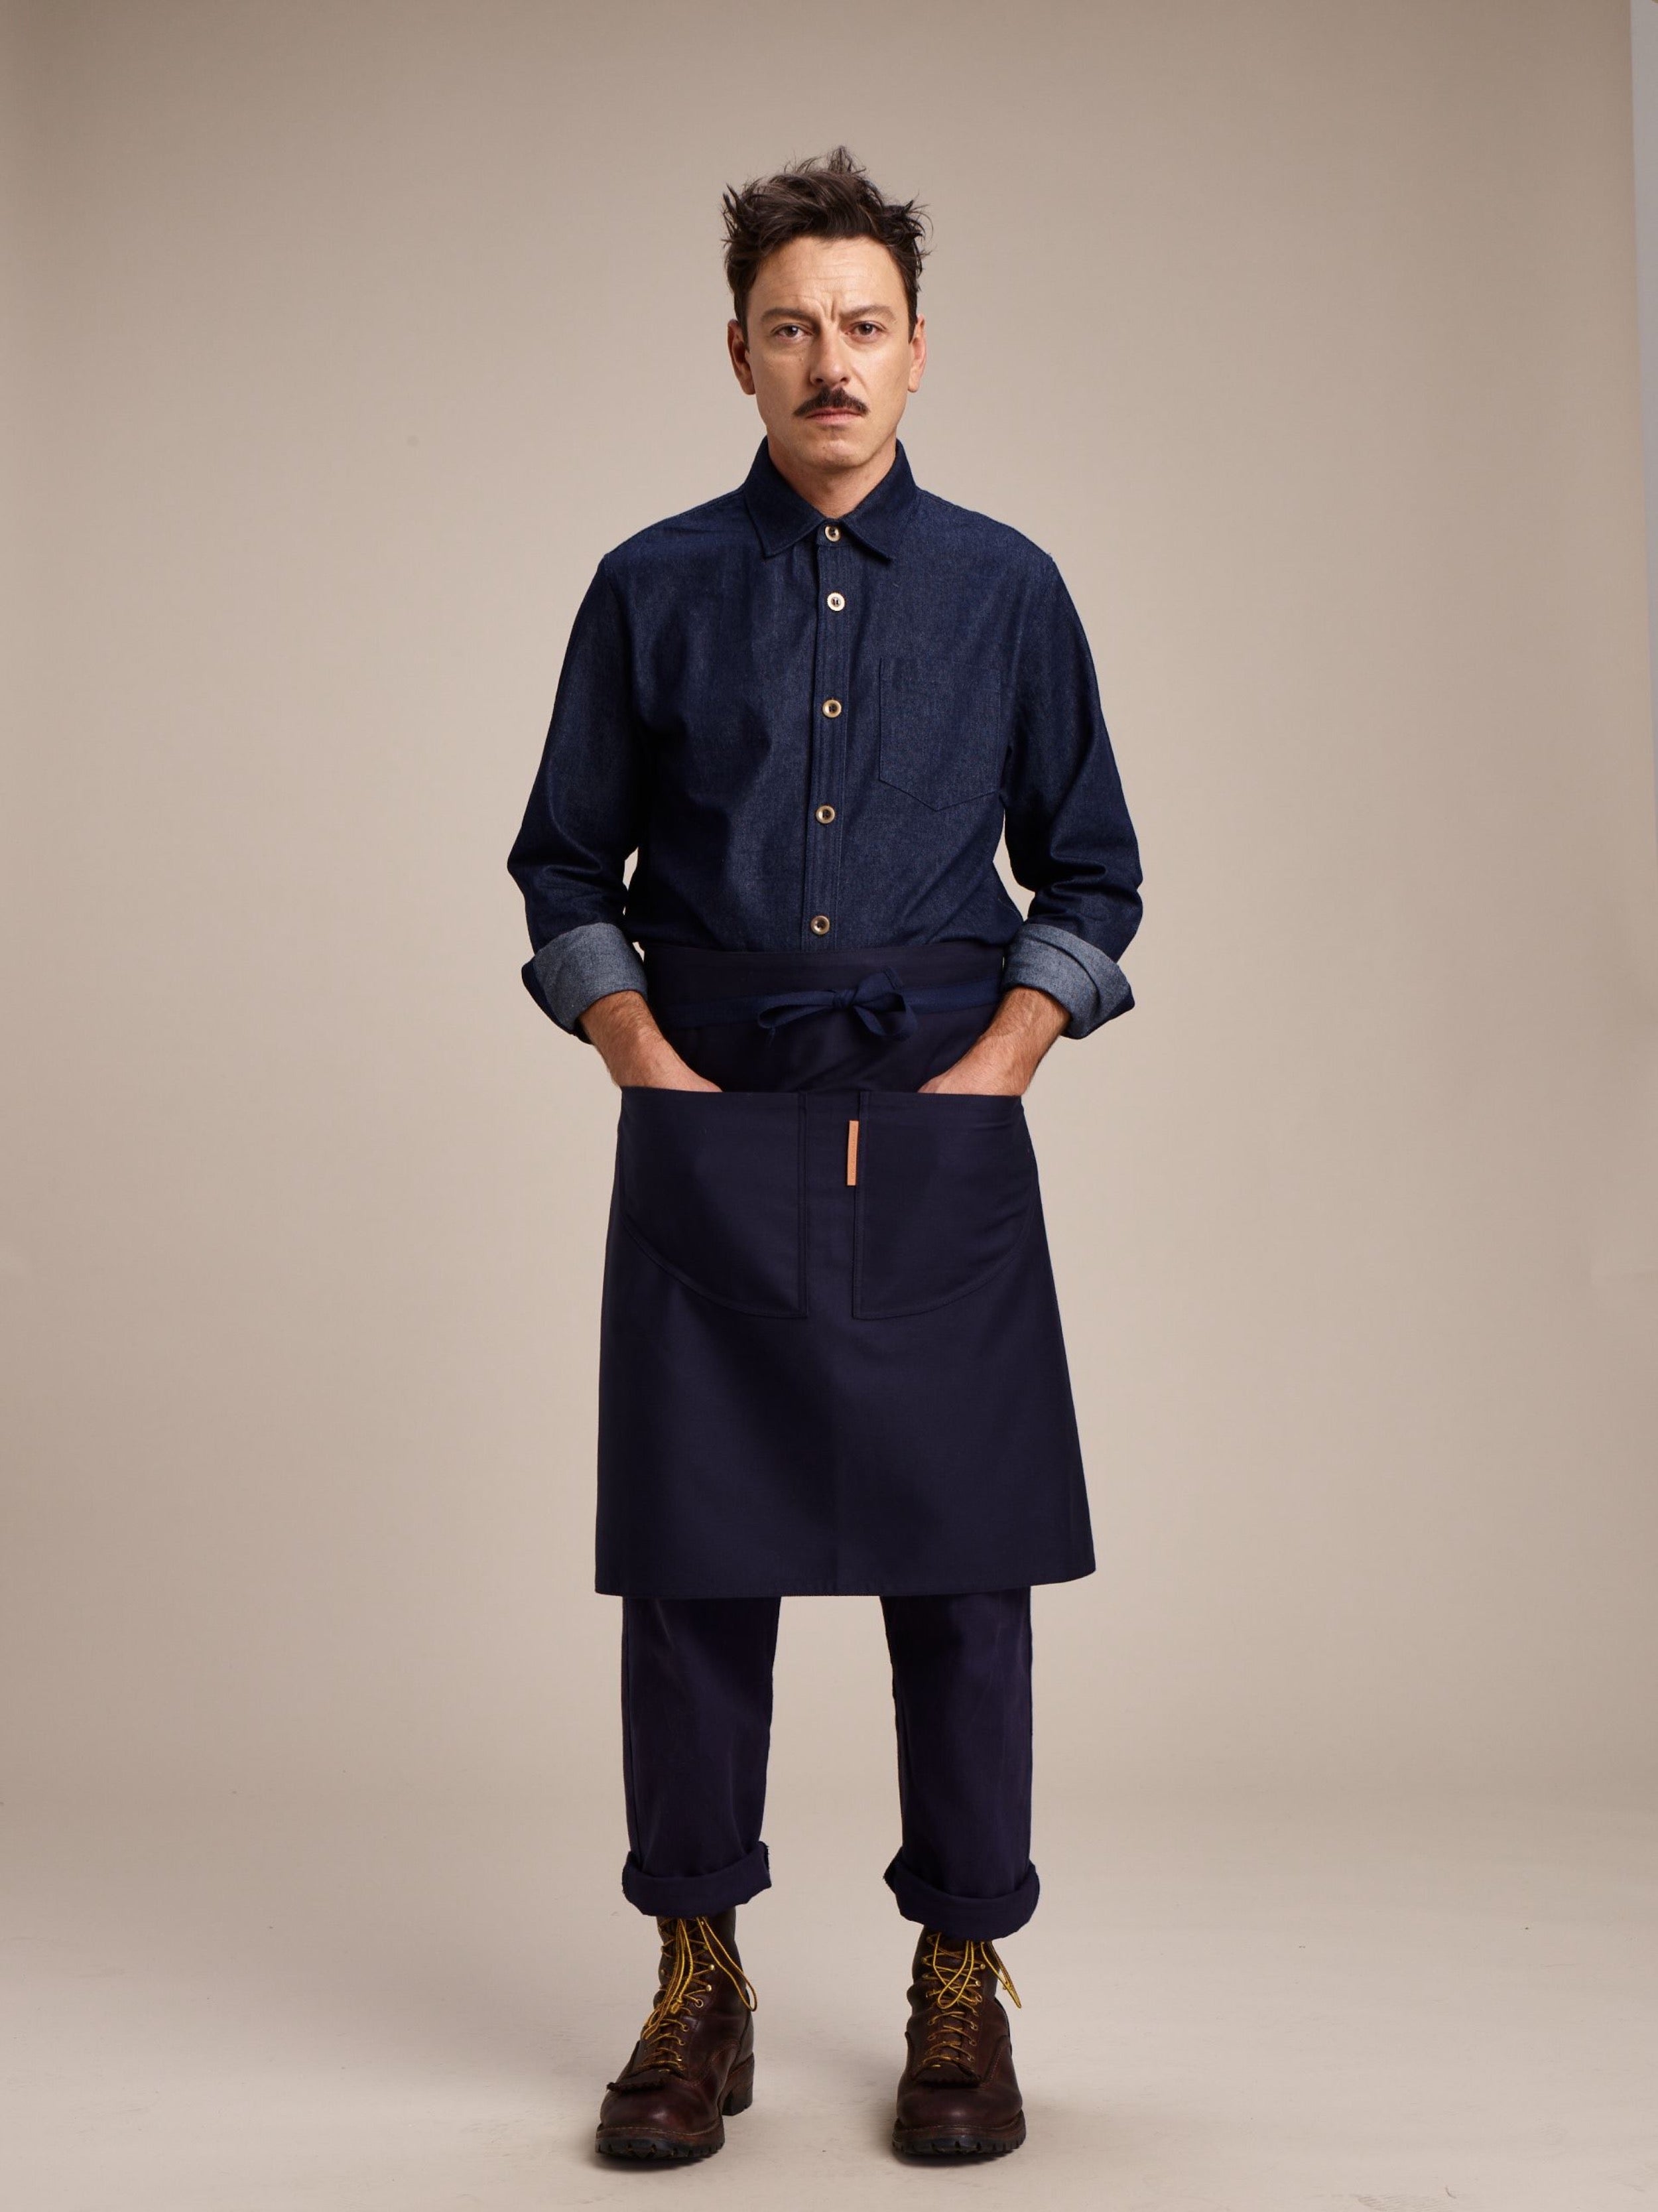 Man wearing Carrier Company Denim Collar Shirt, Chef's Apron and Men's Work Trouser